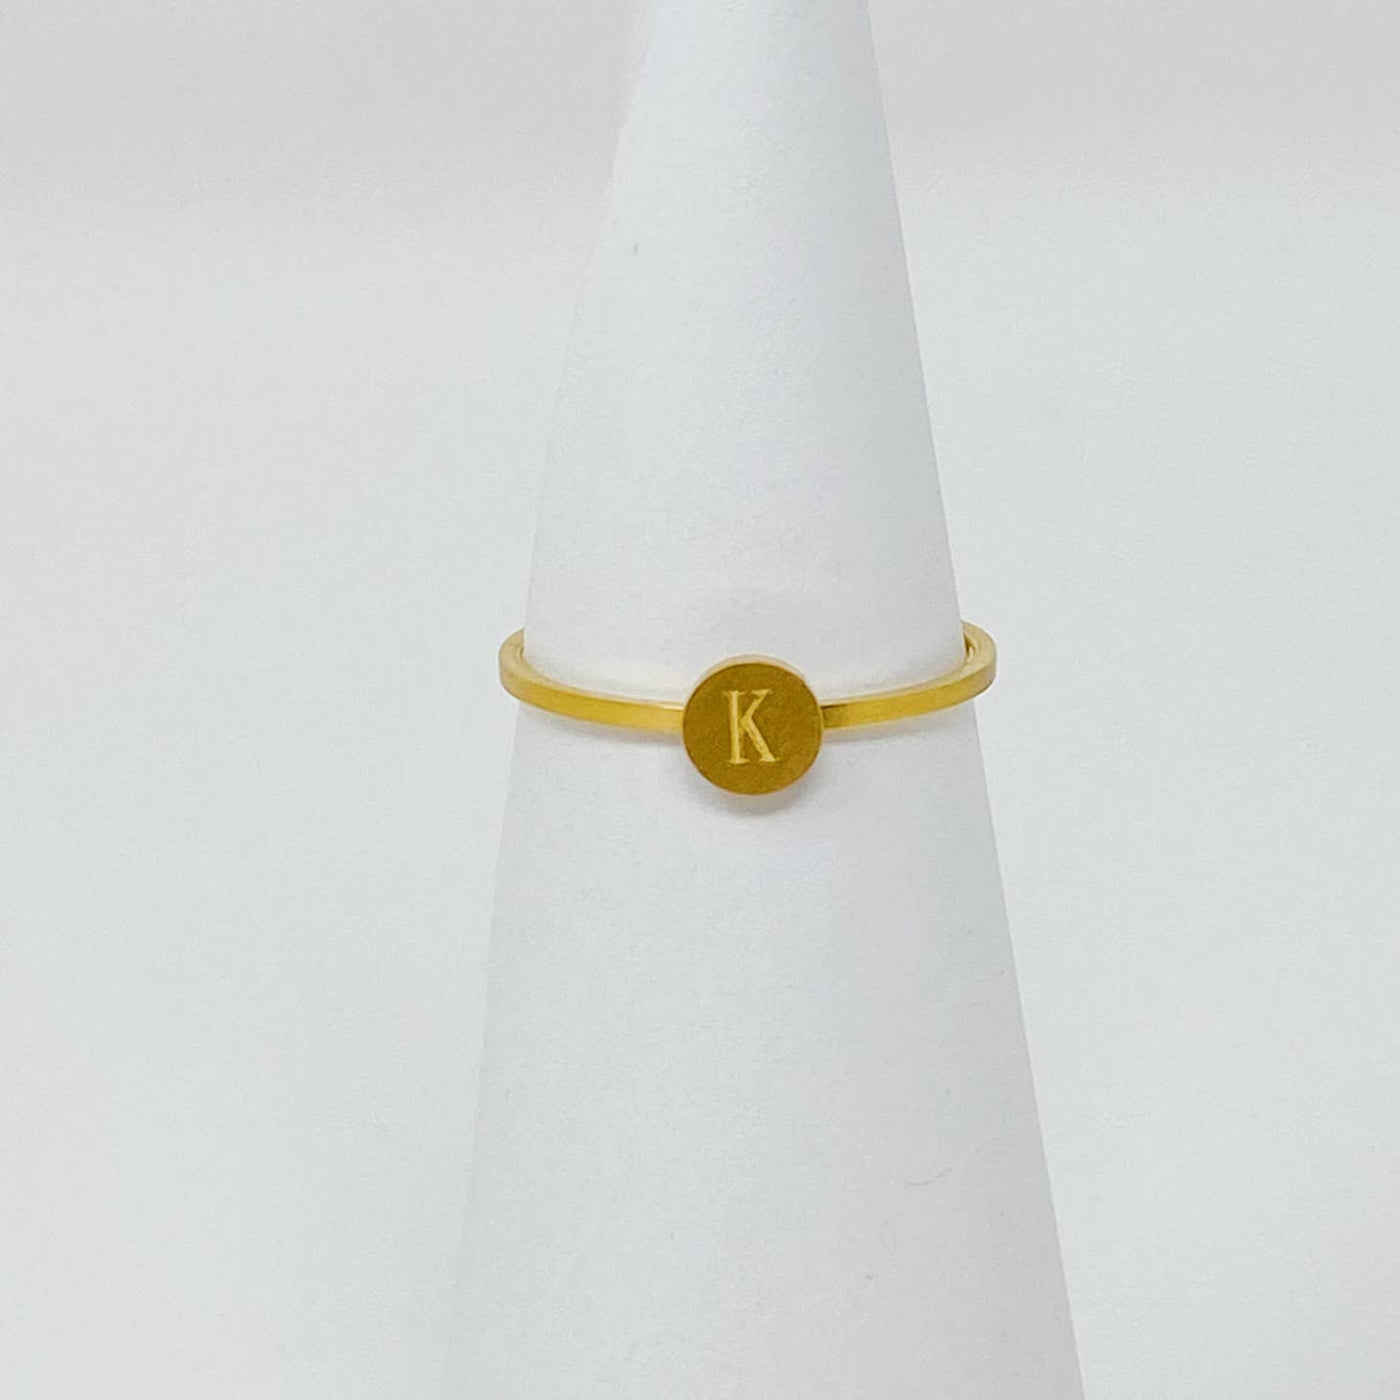 18k gold plated stainless steel monogram ring with "K" initial